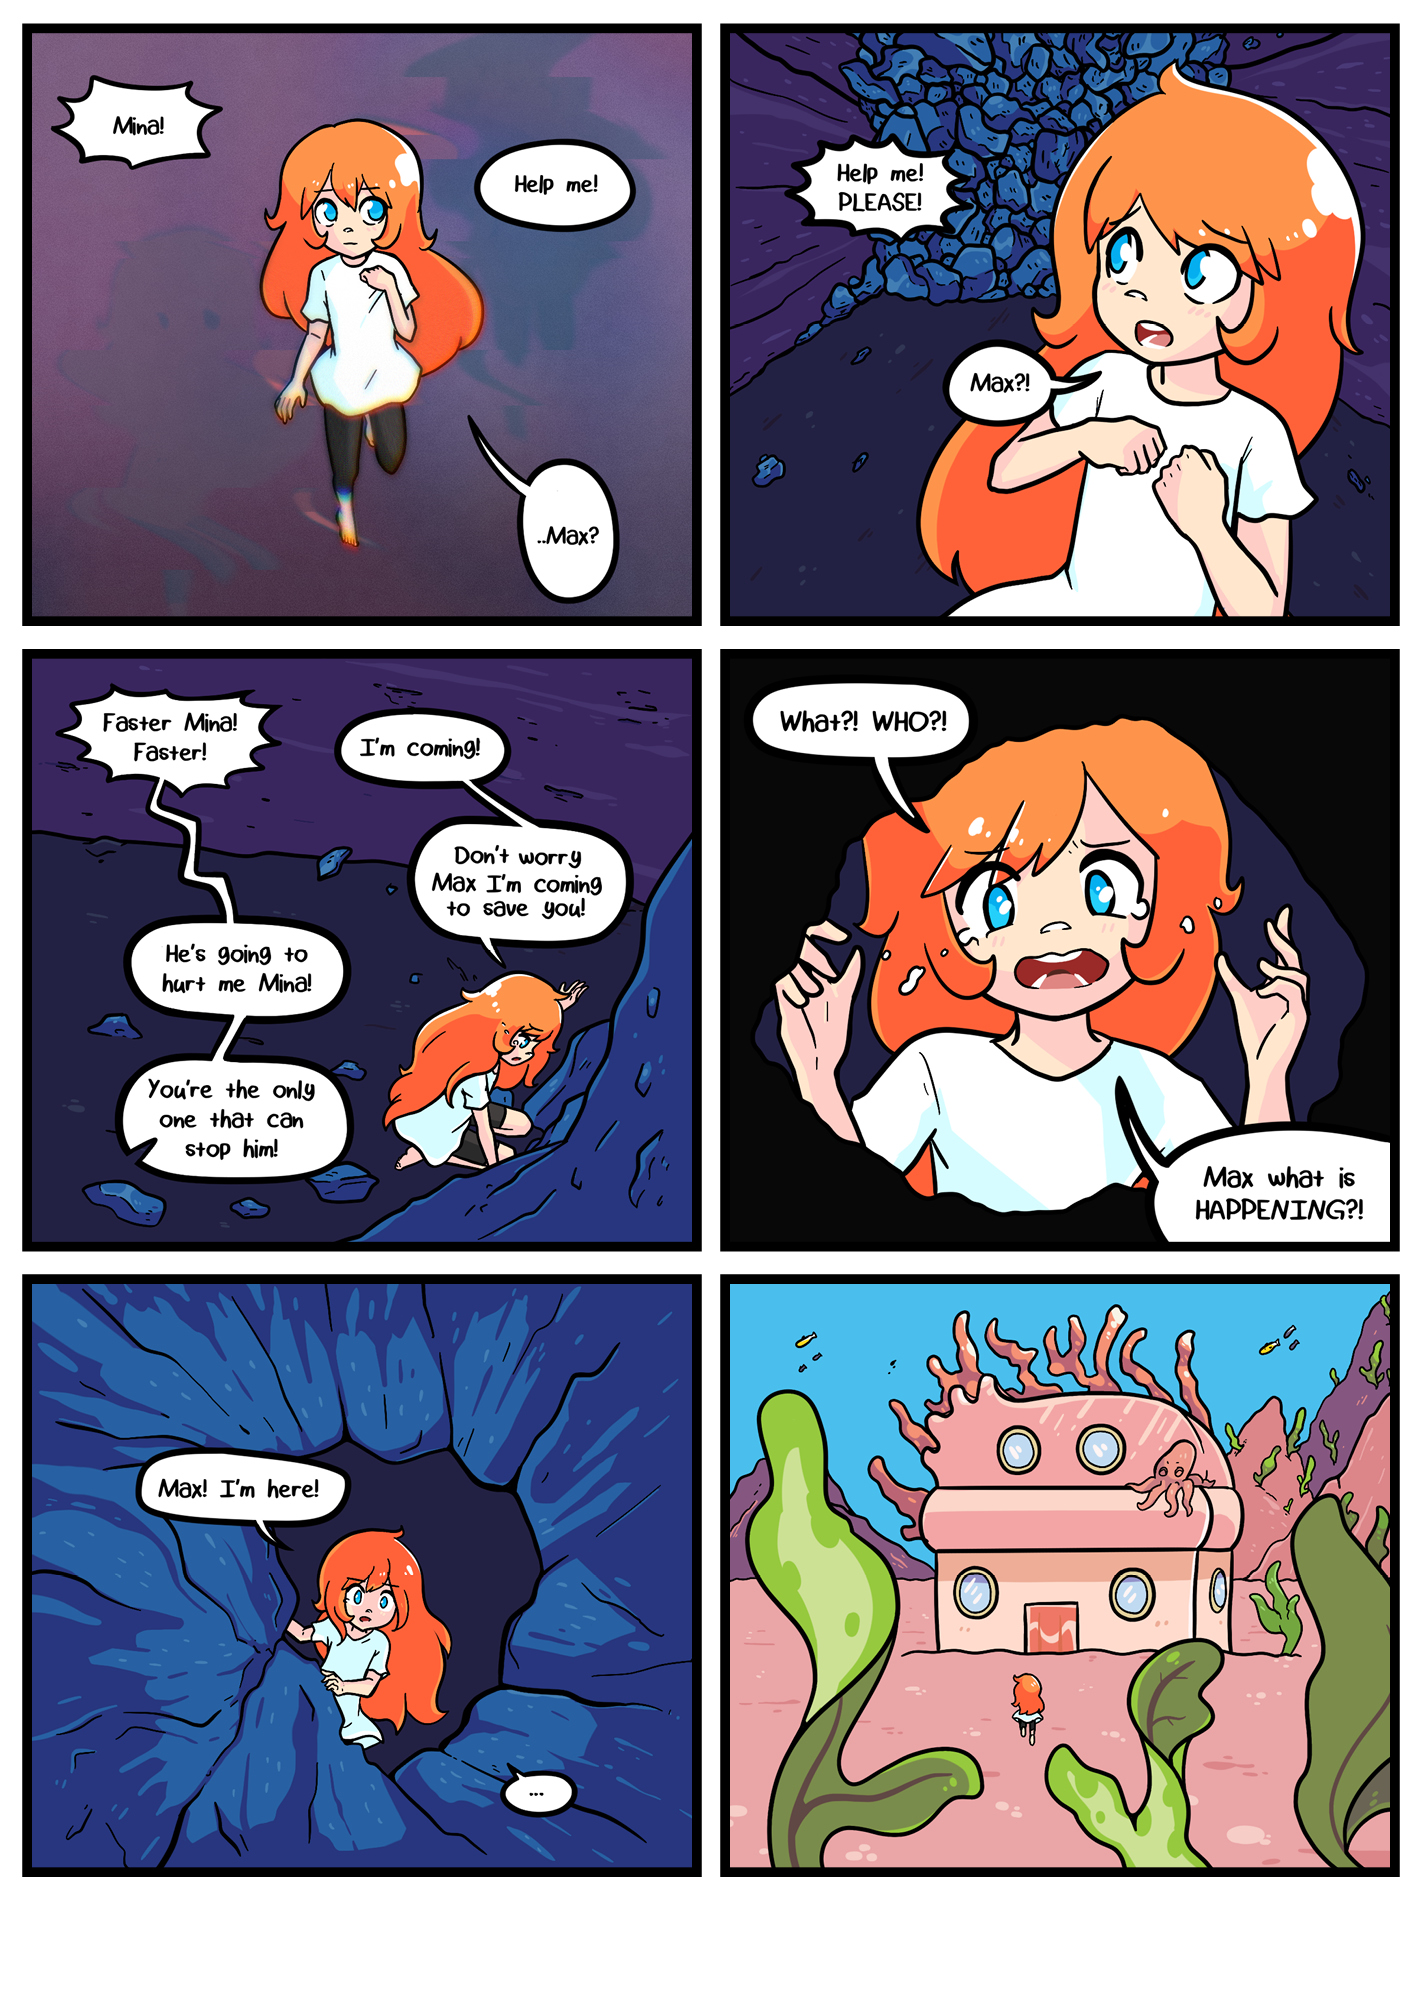 Seasick the underwater adventure comic, chapter 2 page 76 full